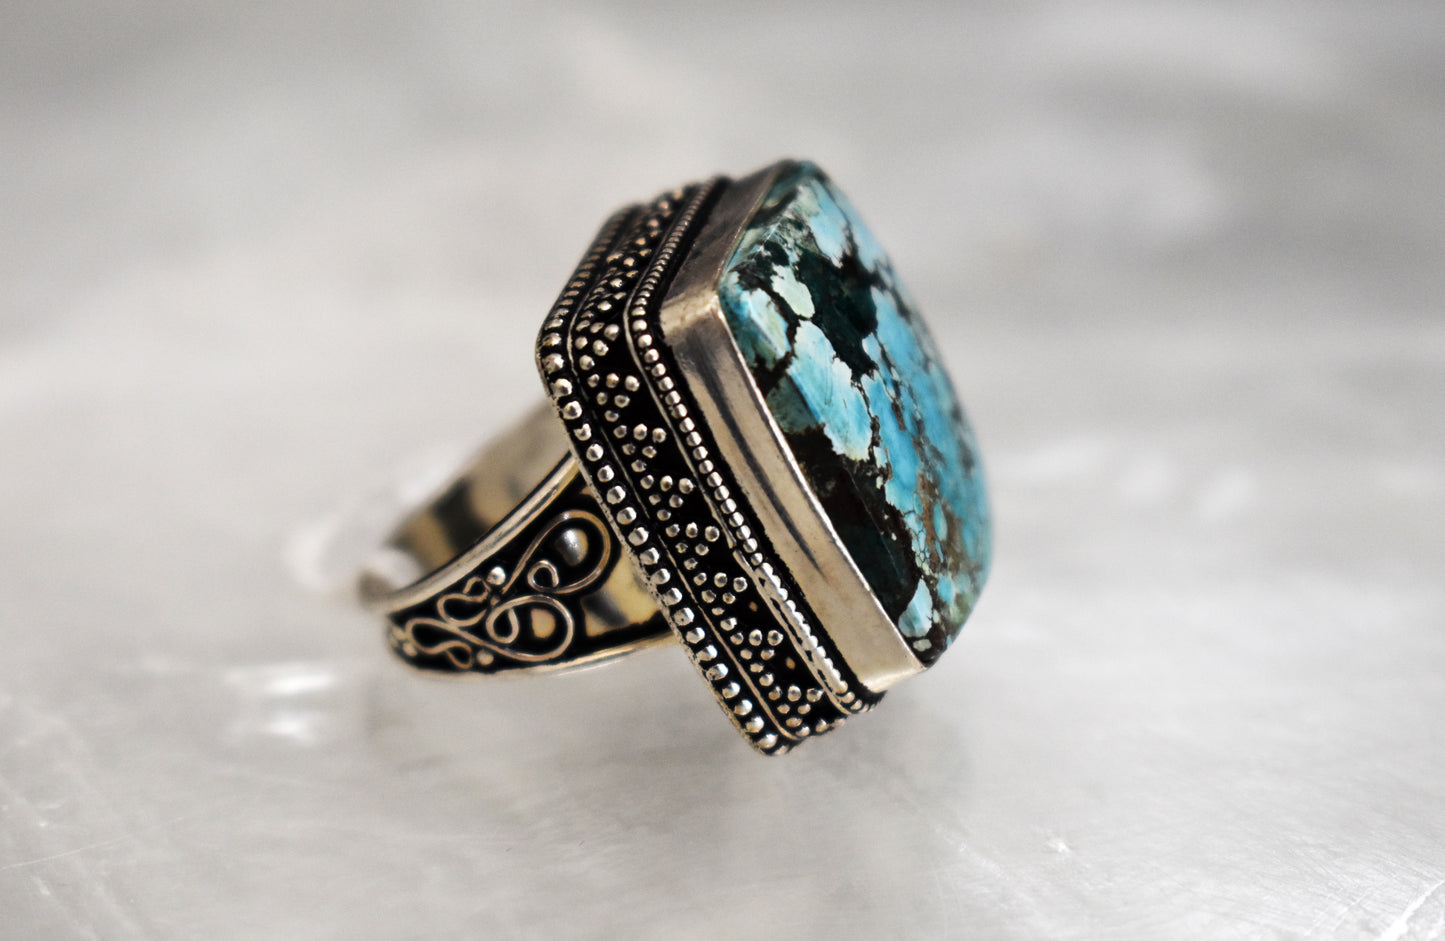 stones-of-transformation - Blue Copper Turquoise Ring (Size 7.5) - Stones of Transformation - 